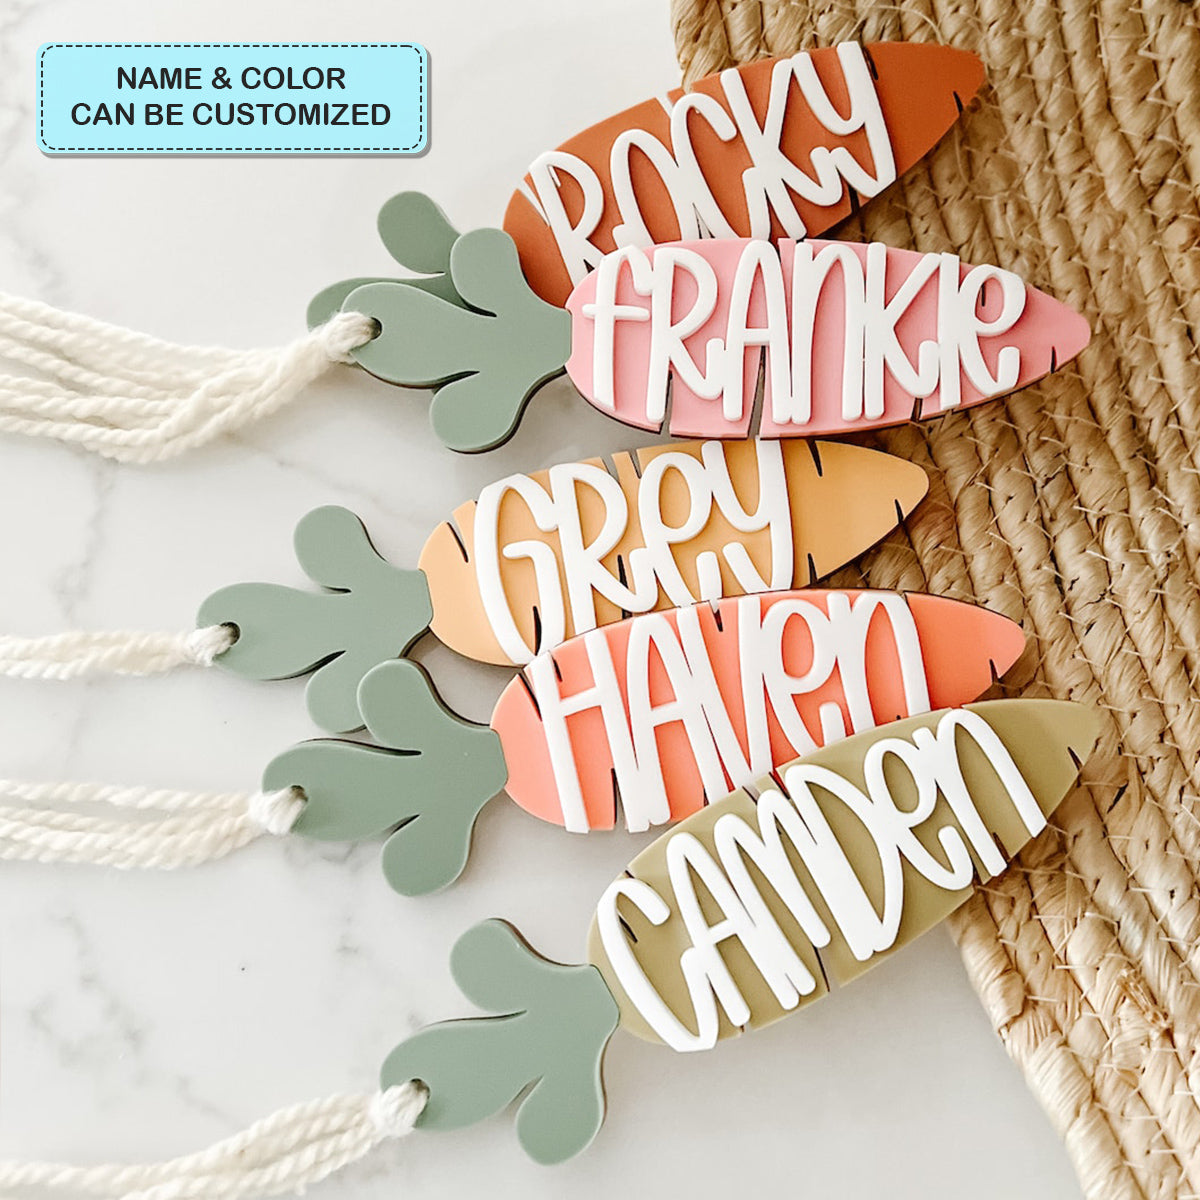 Carrot Tag - Personalized Custom Basket Tag - Easter Gift For Family Members, Grandma, Mom